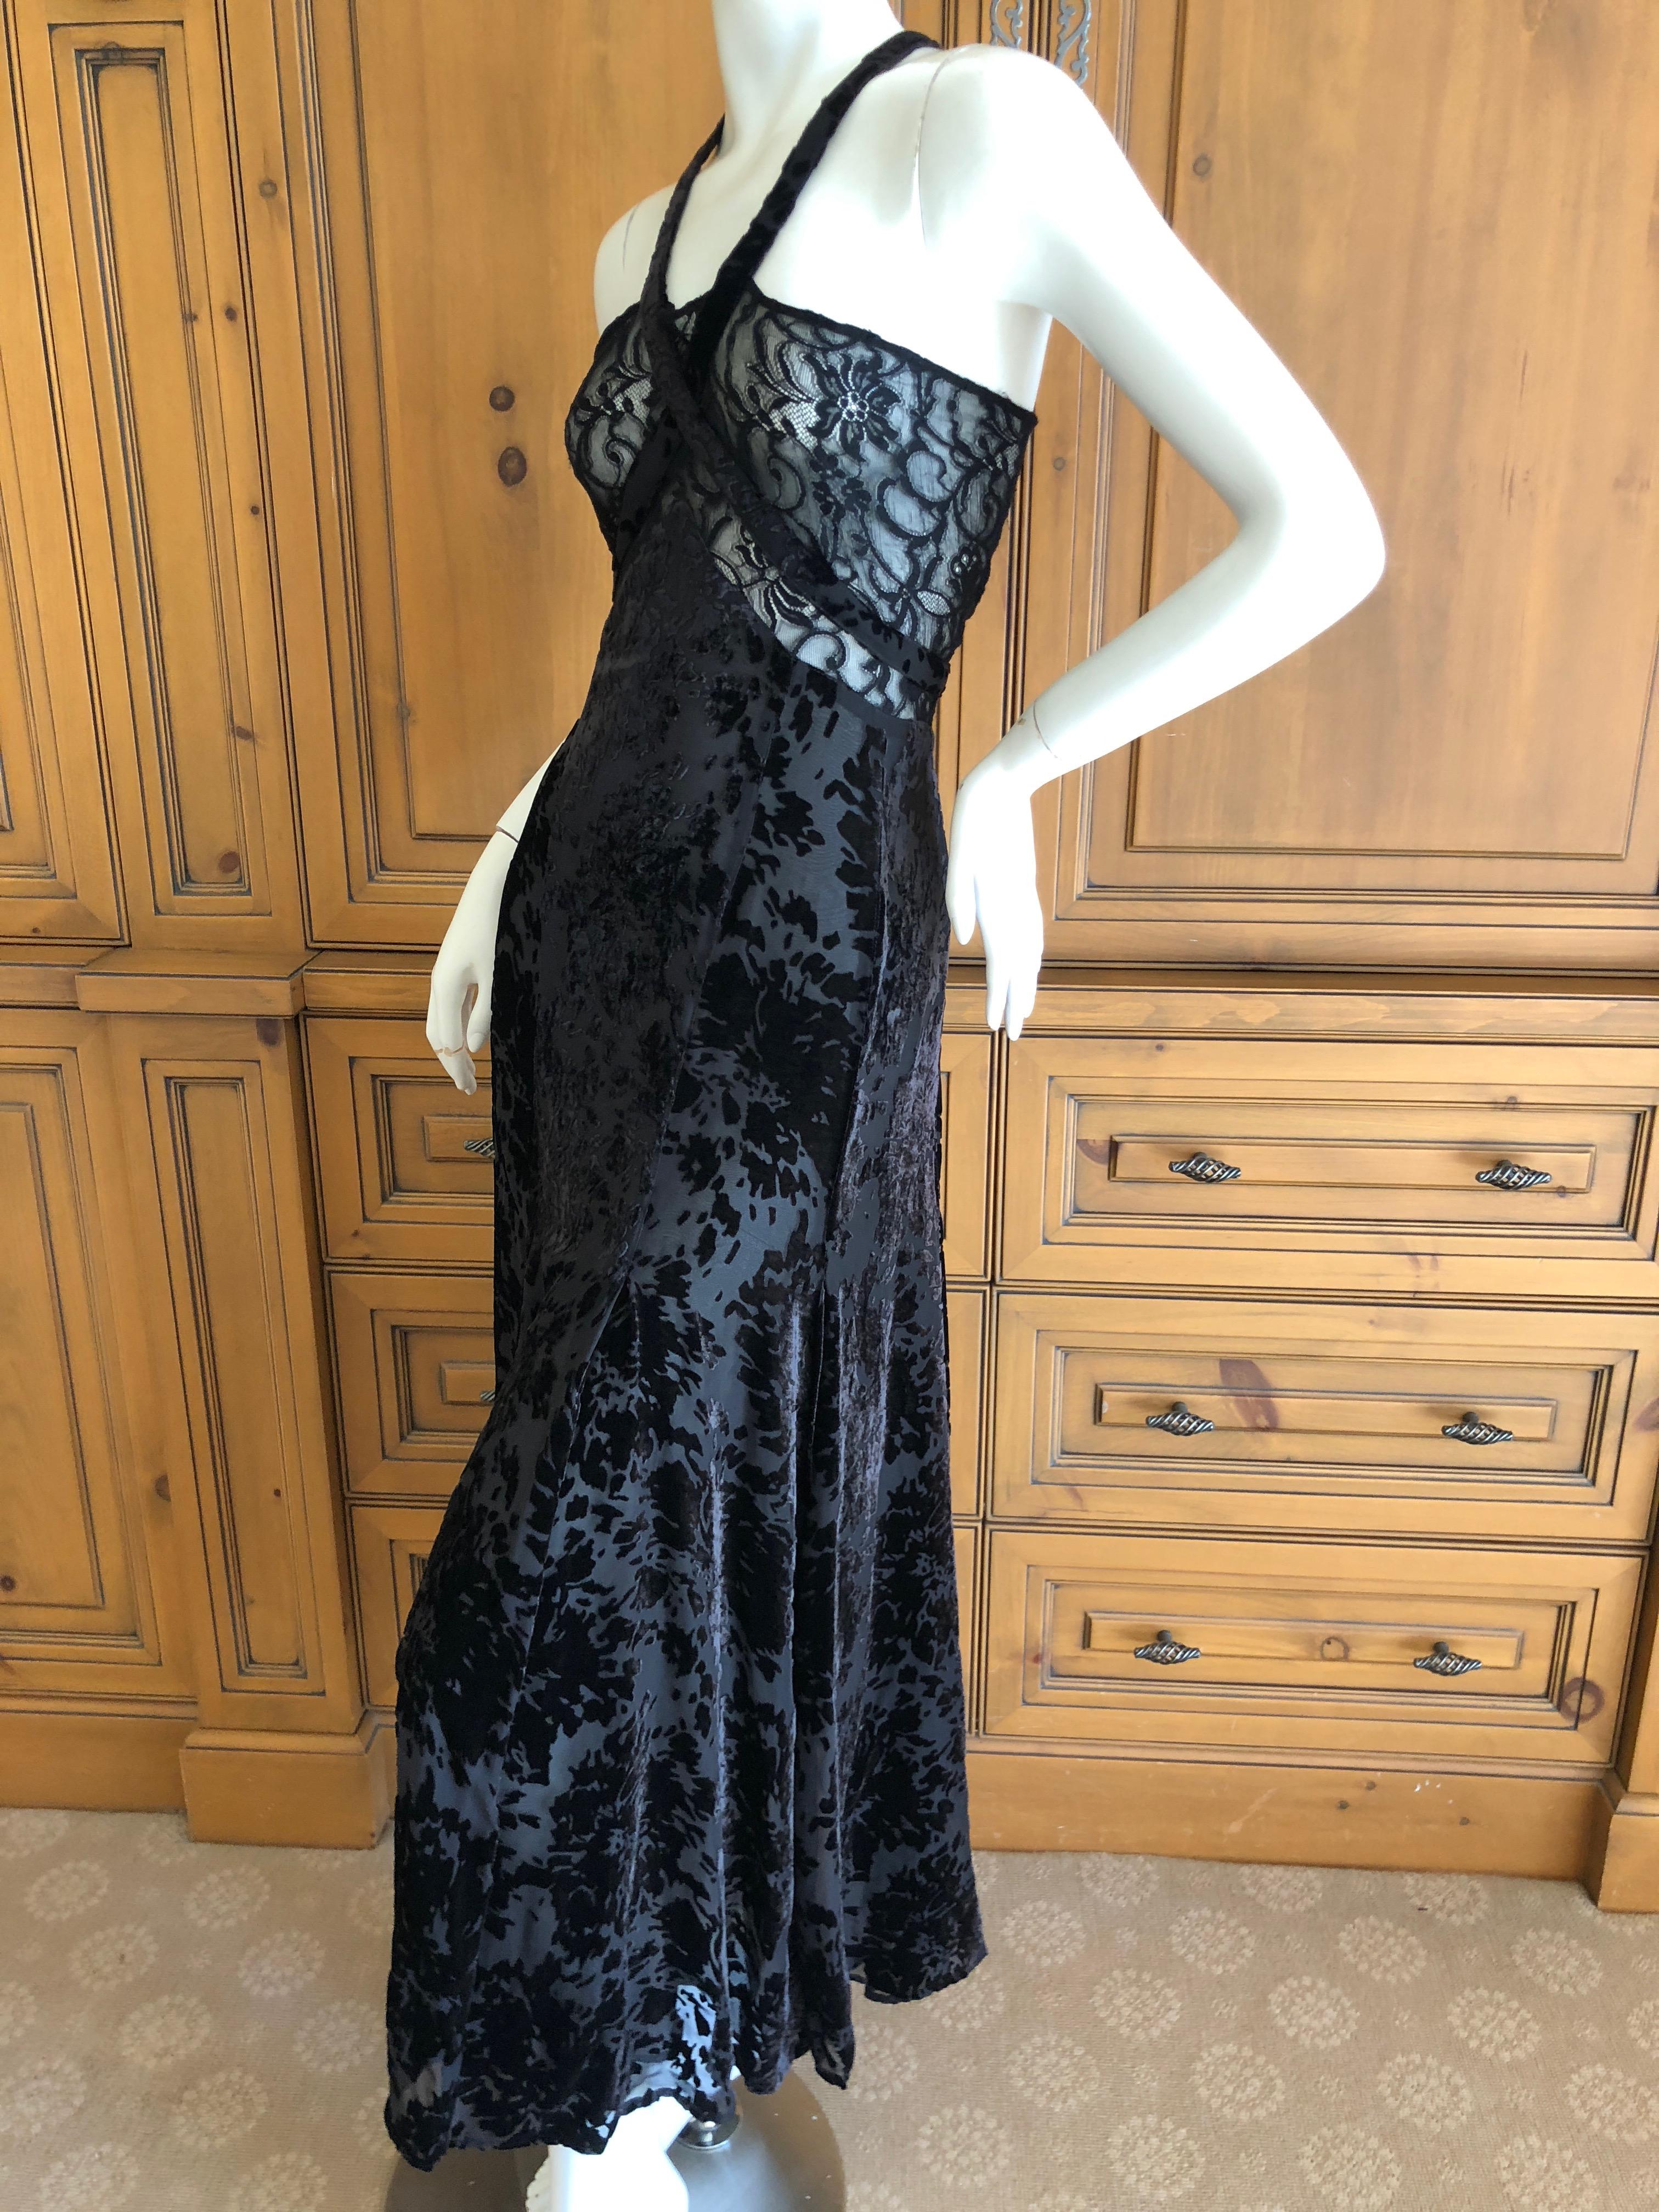 Sonia Rykiel Black Devore Velvet and Lace Vintage Dress In Good Condition For Sale In Cloverdale, CA